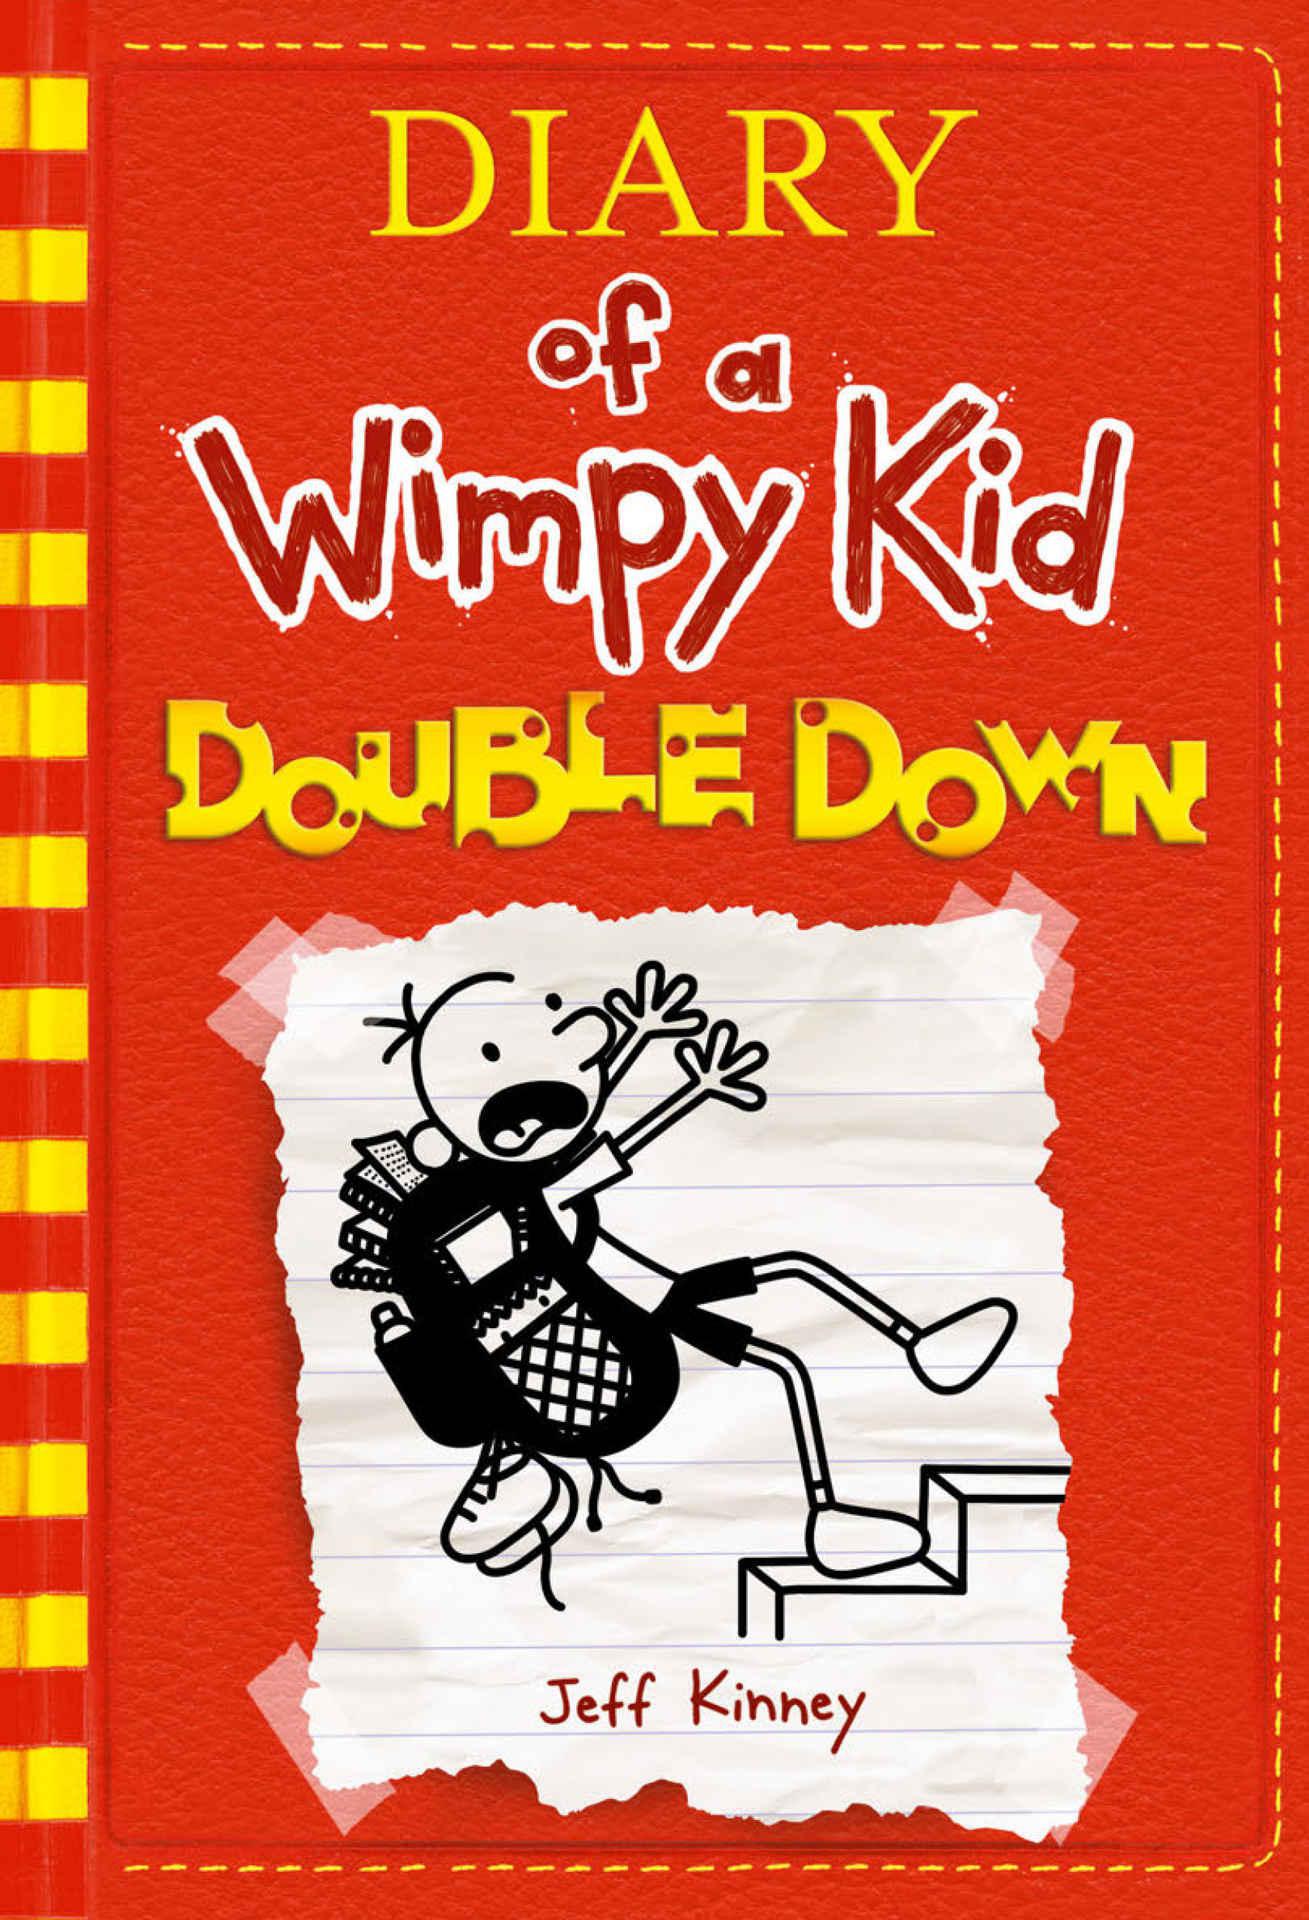 Double Down (Diary of a Wimpy Kid Book 11)